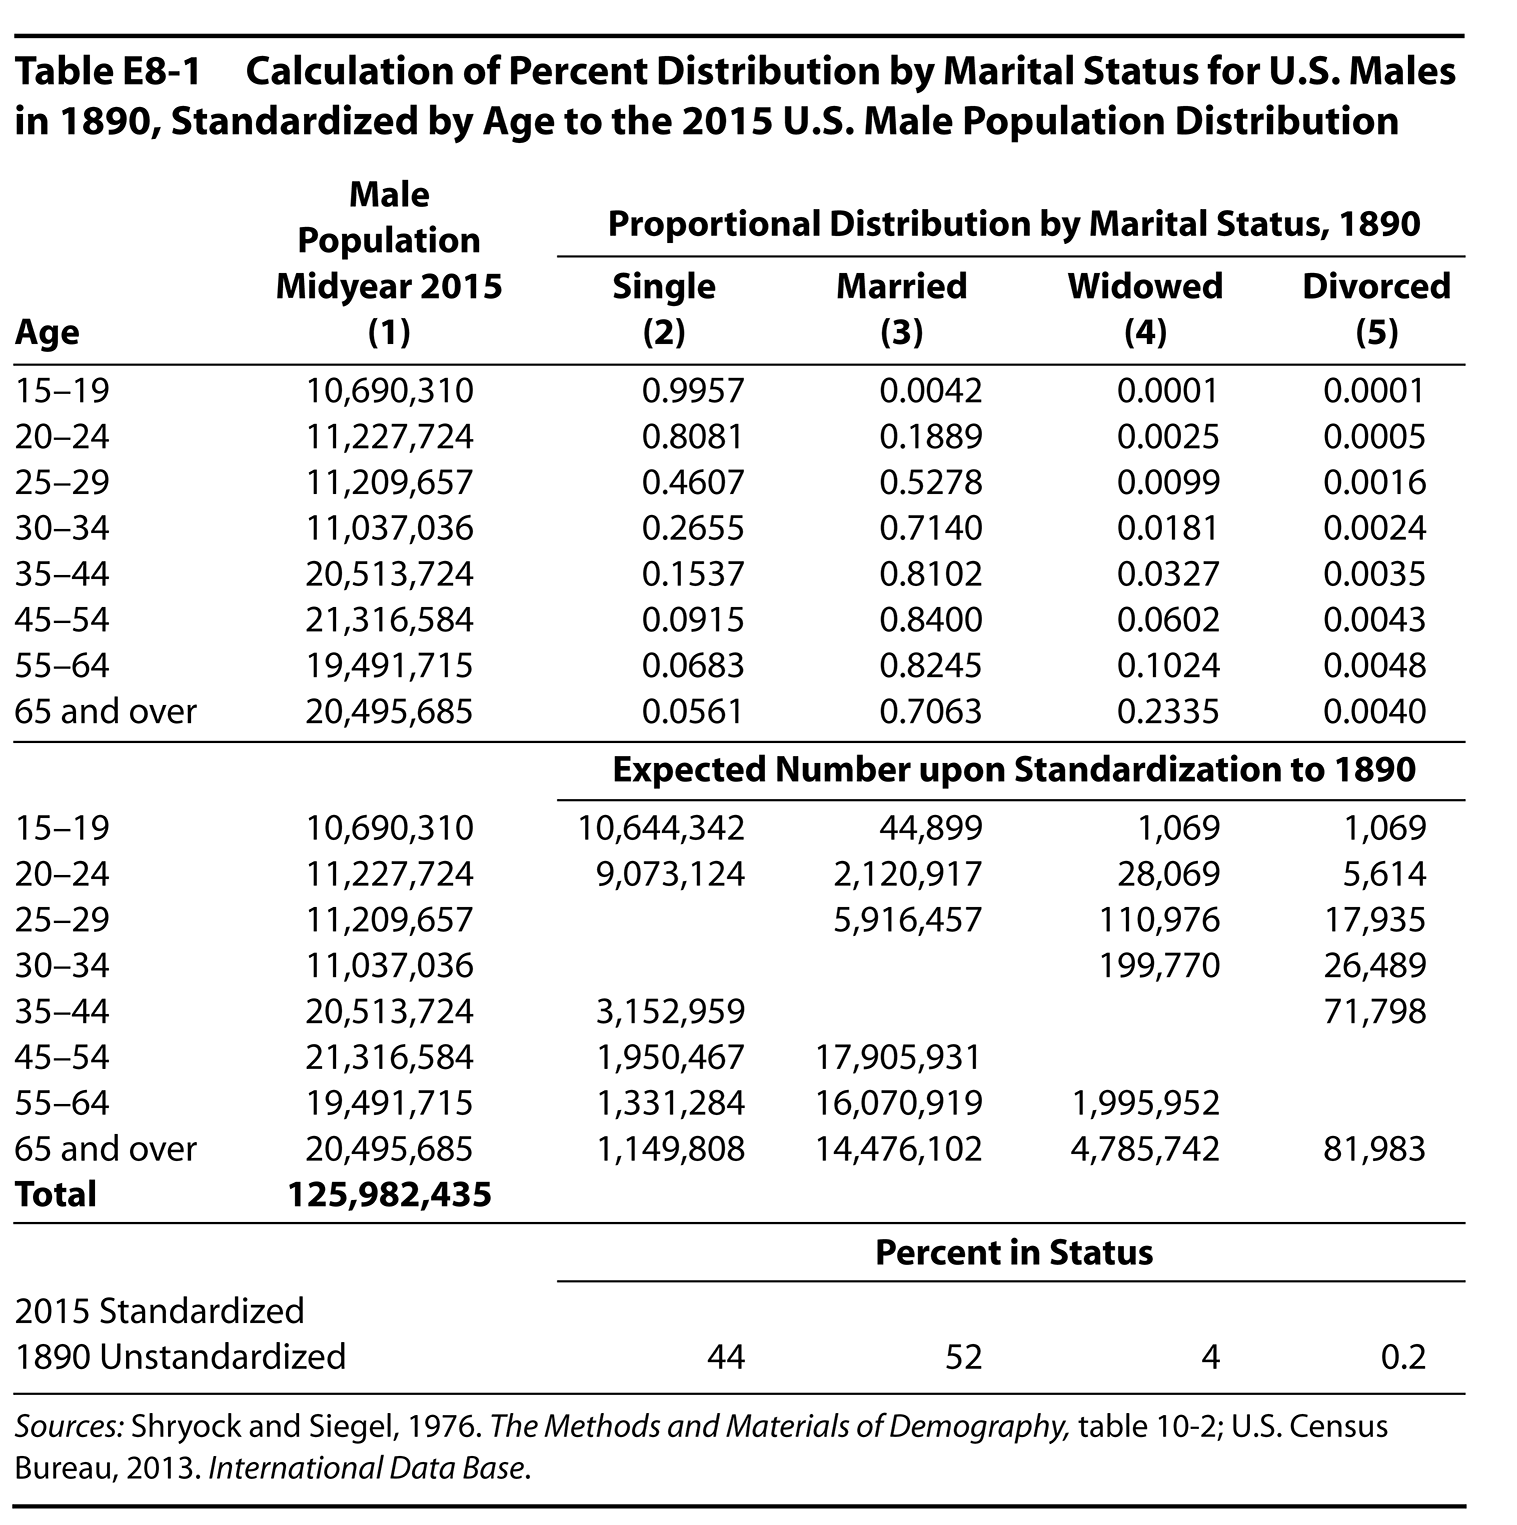 Table E8-1 Calculation of Percent Distribution by Marital Status for U.S. Males in 1890, Standardized by Age to the 2015 U.S. Male Population Distribution